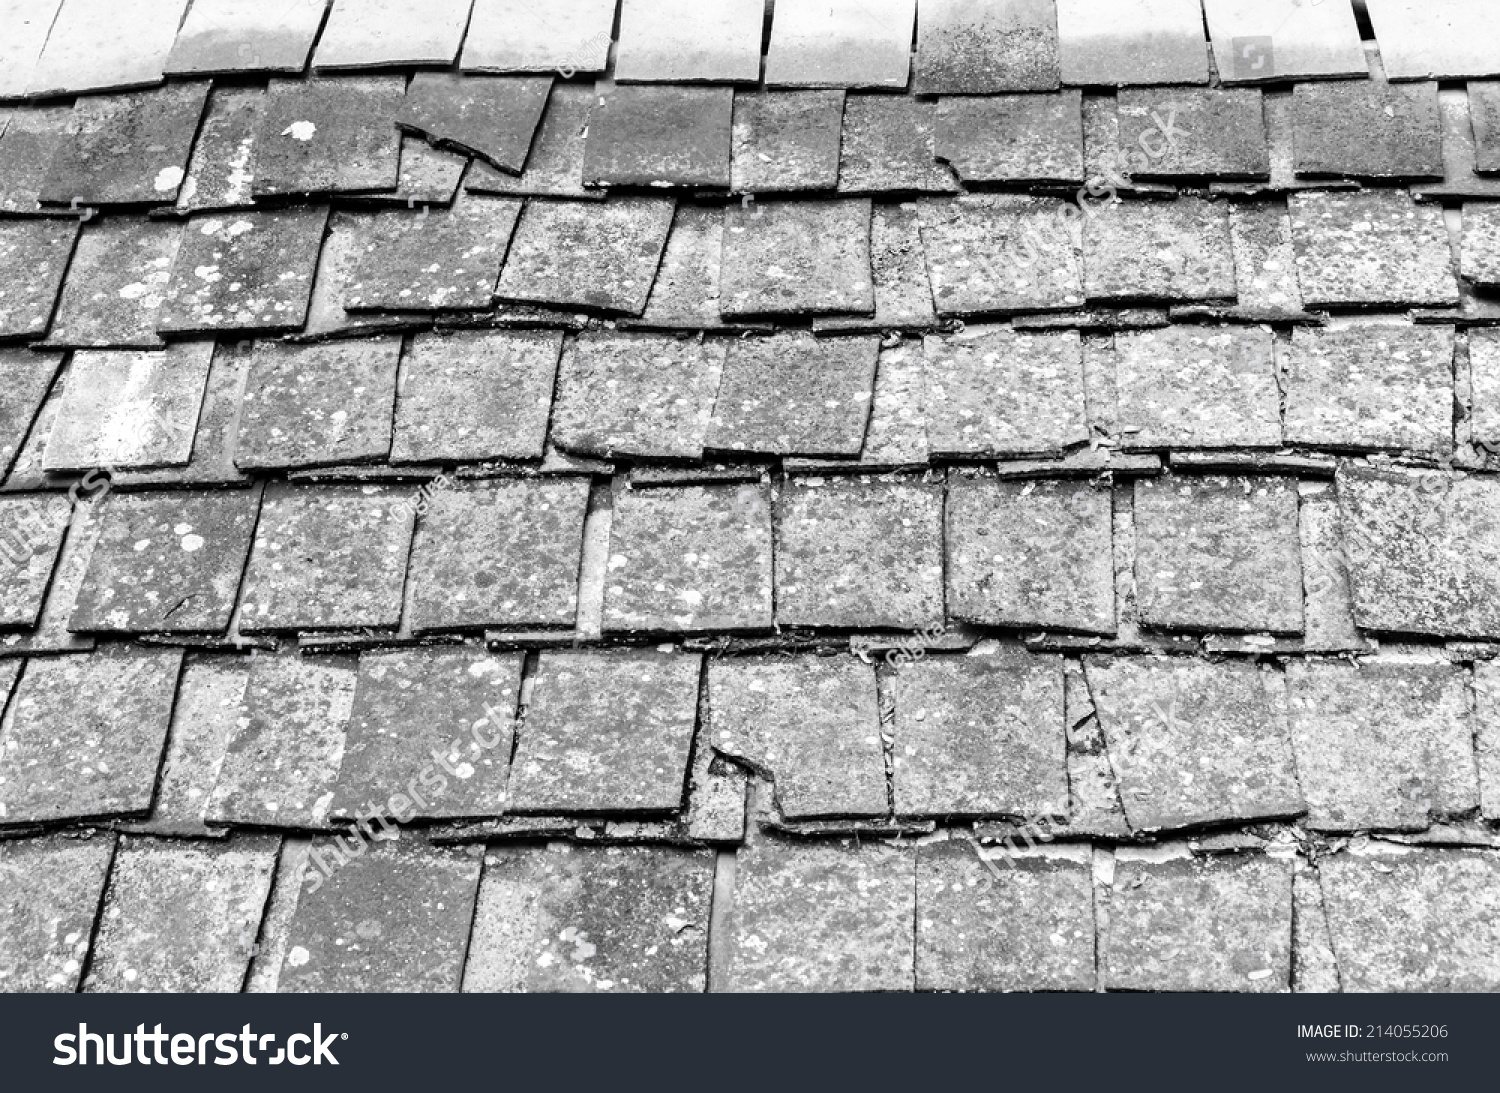 Black And White Roof Top Stock Photo 214055206 : Shutterstock